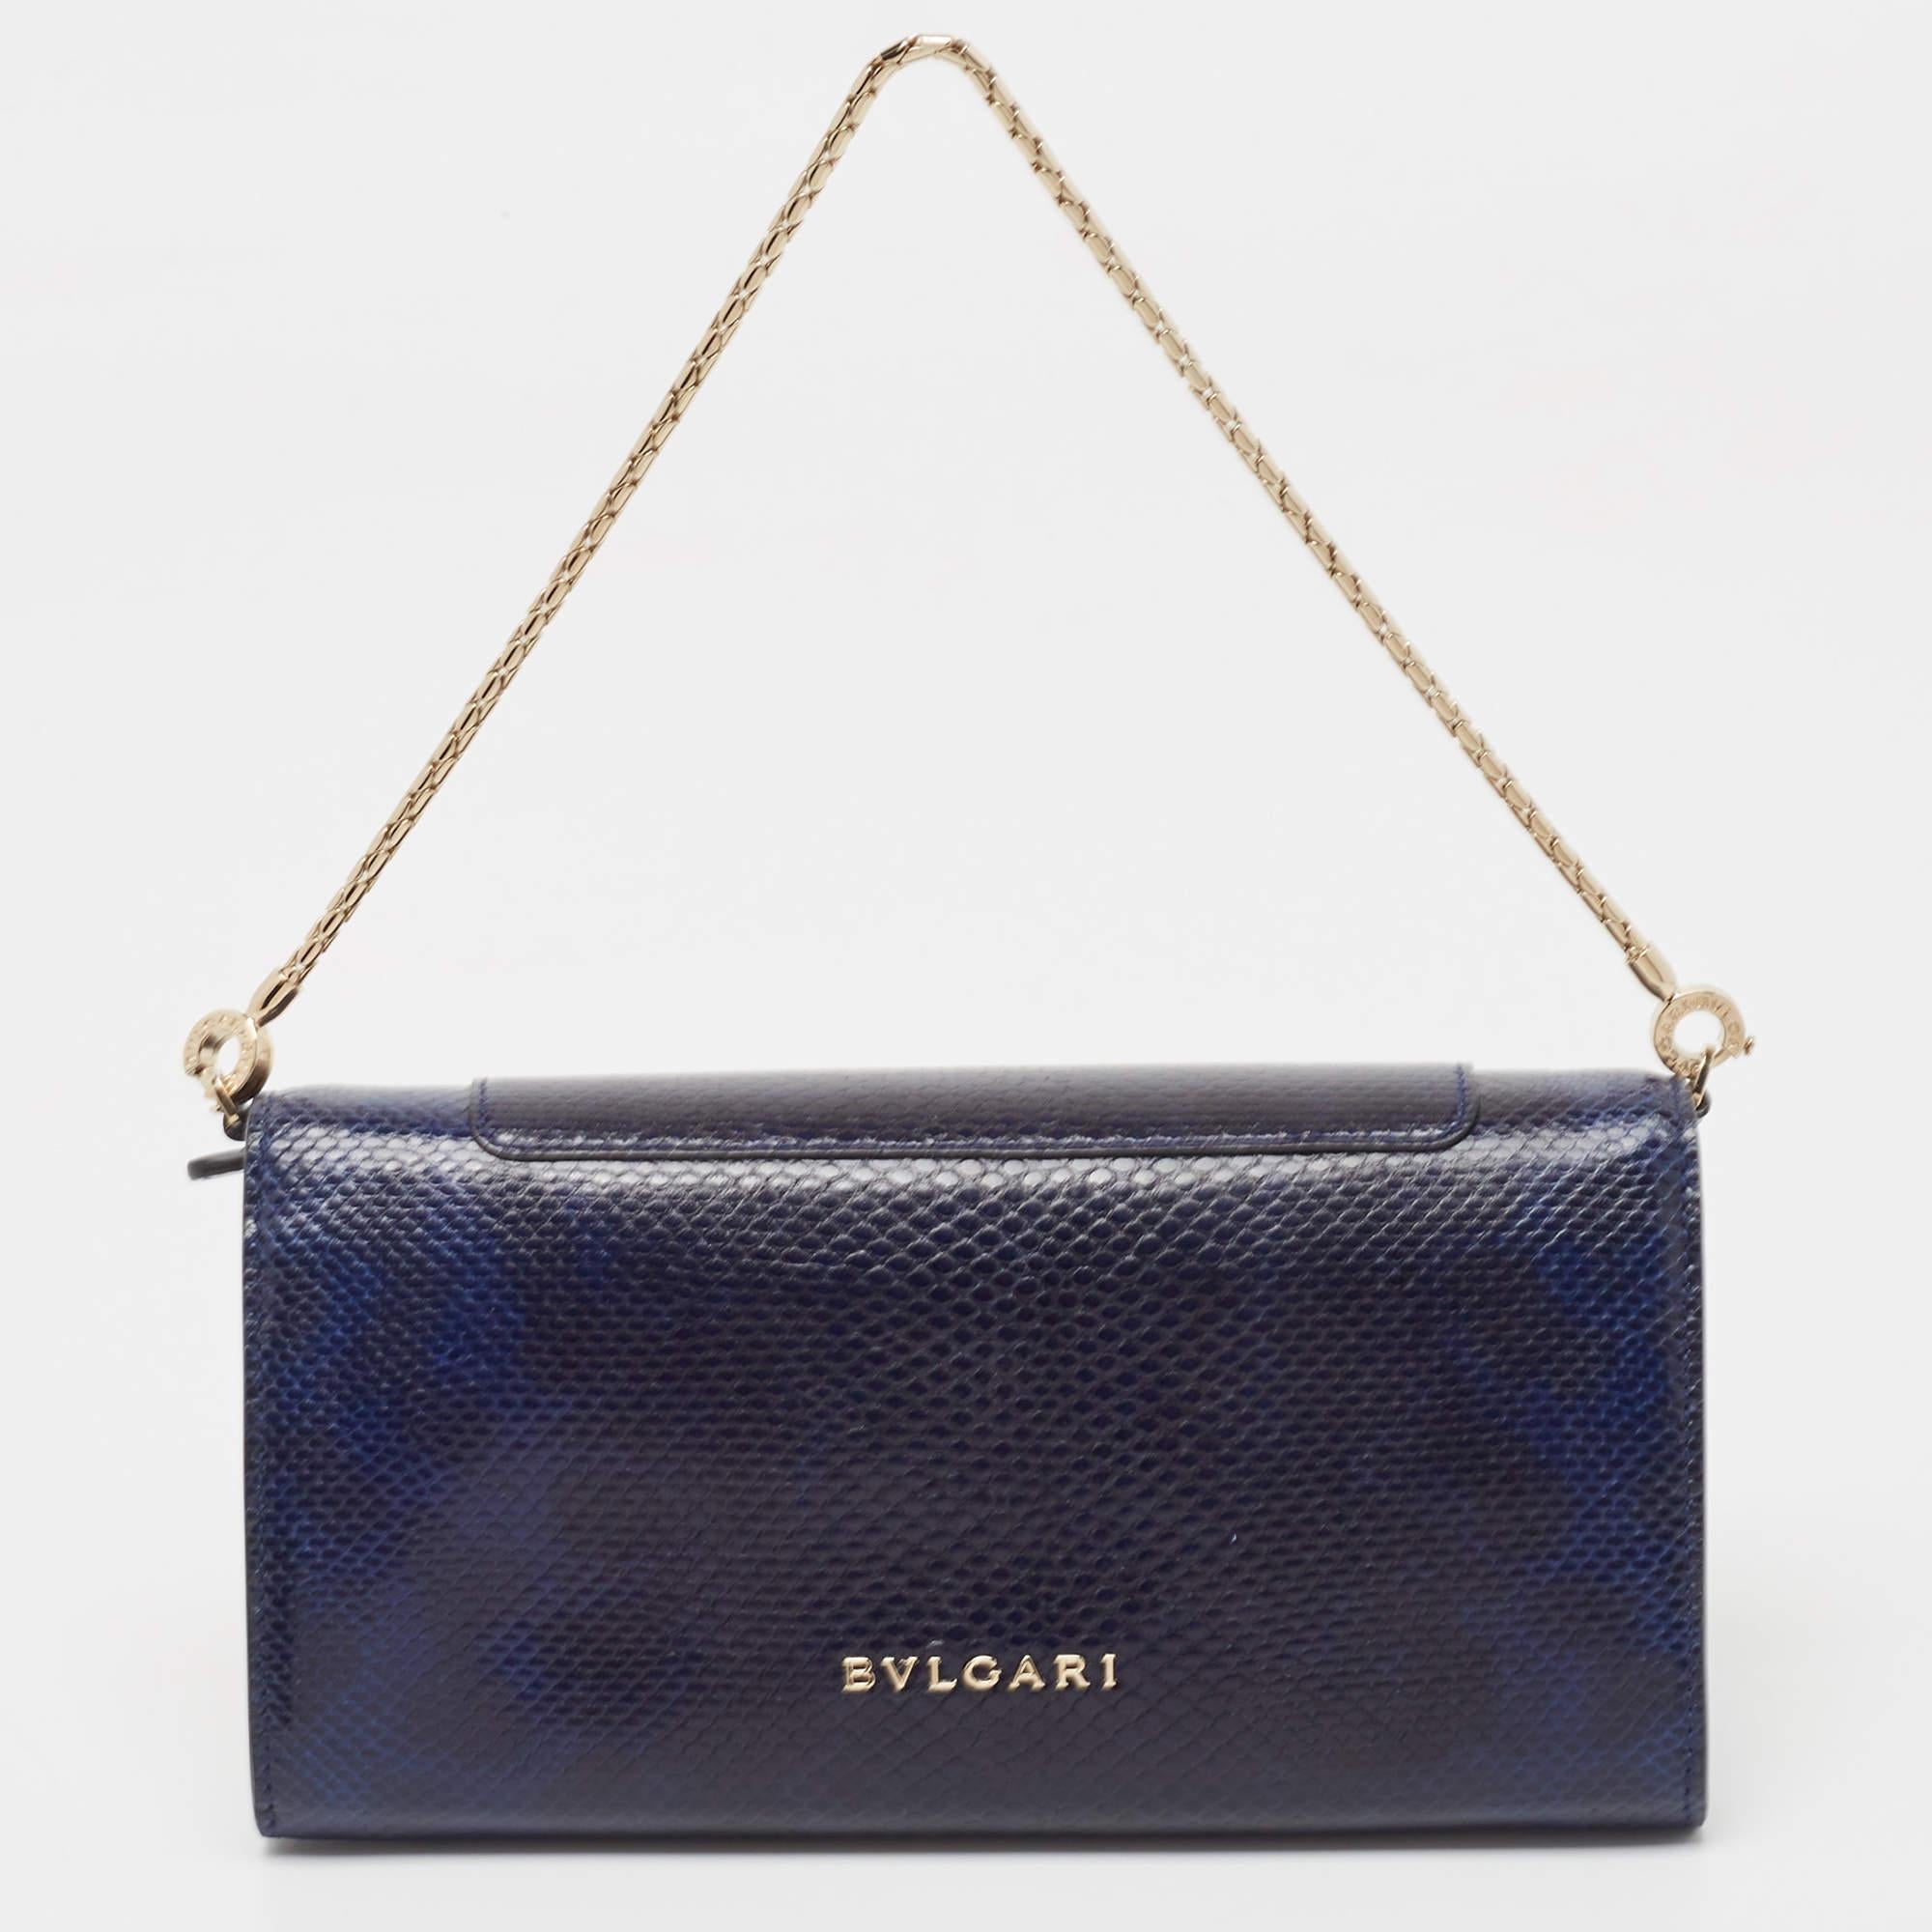 Indulge in timeless luxury with this Bvlgari bag for women. Meticulously crafted, this exquisite accessory embodies elegance, functionality, and style, making it the ultimate companion for every sophisticated woman.

